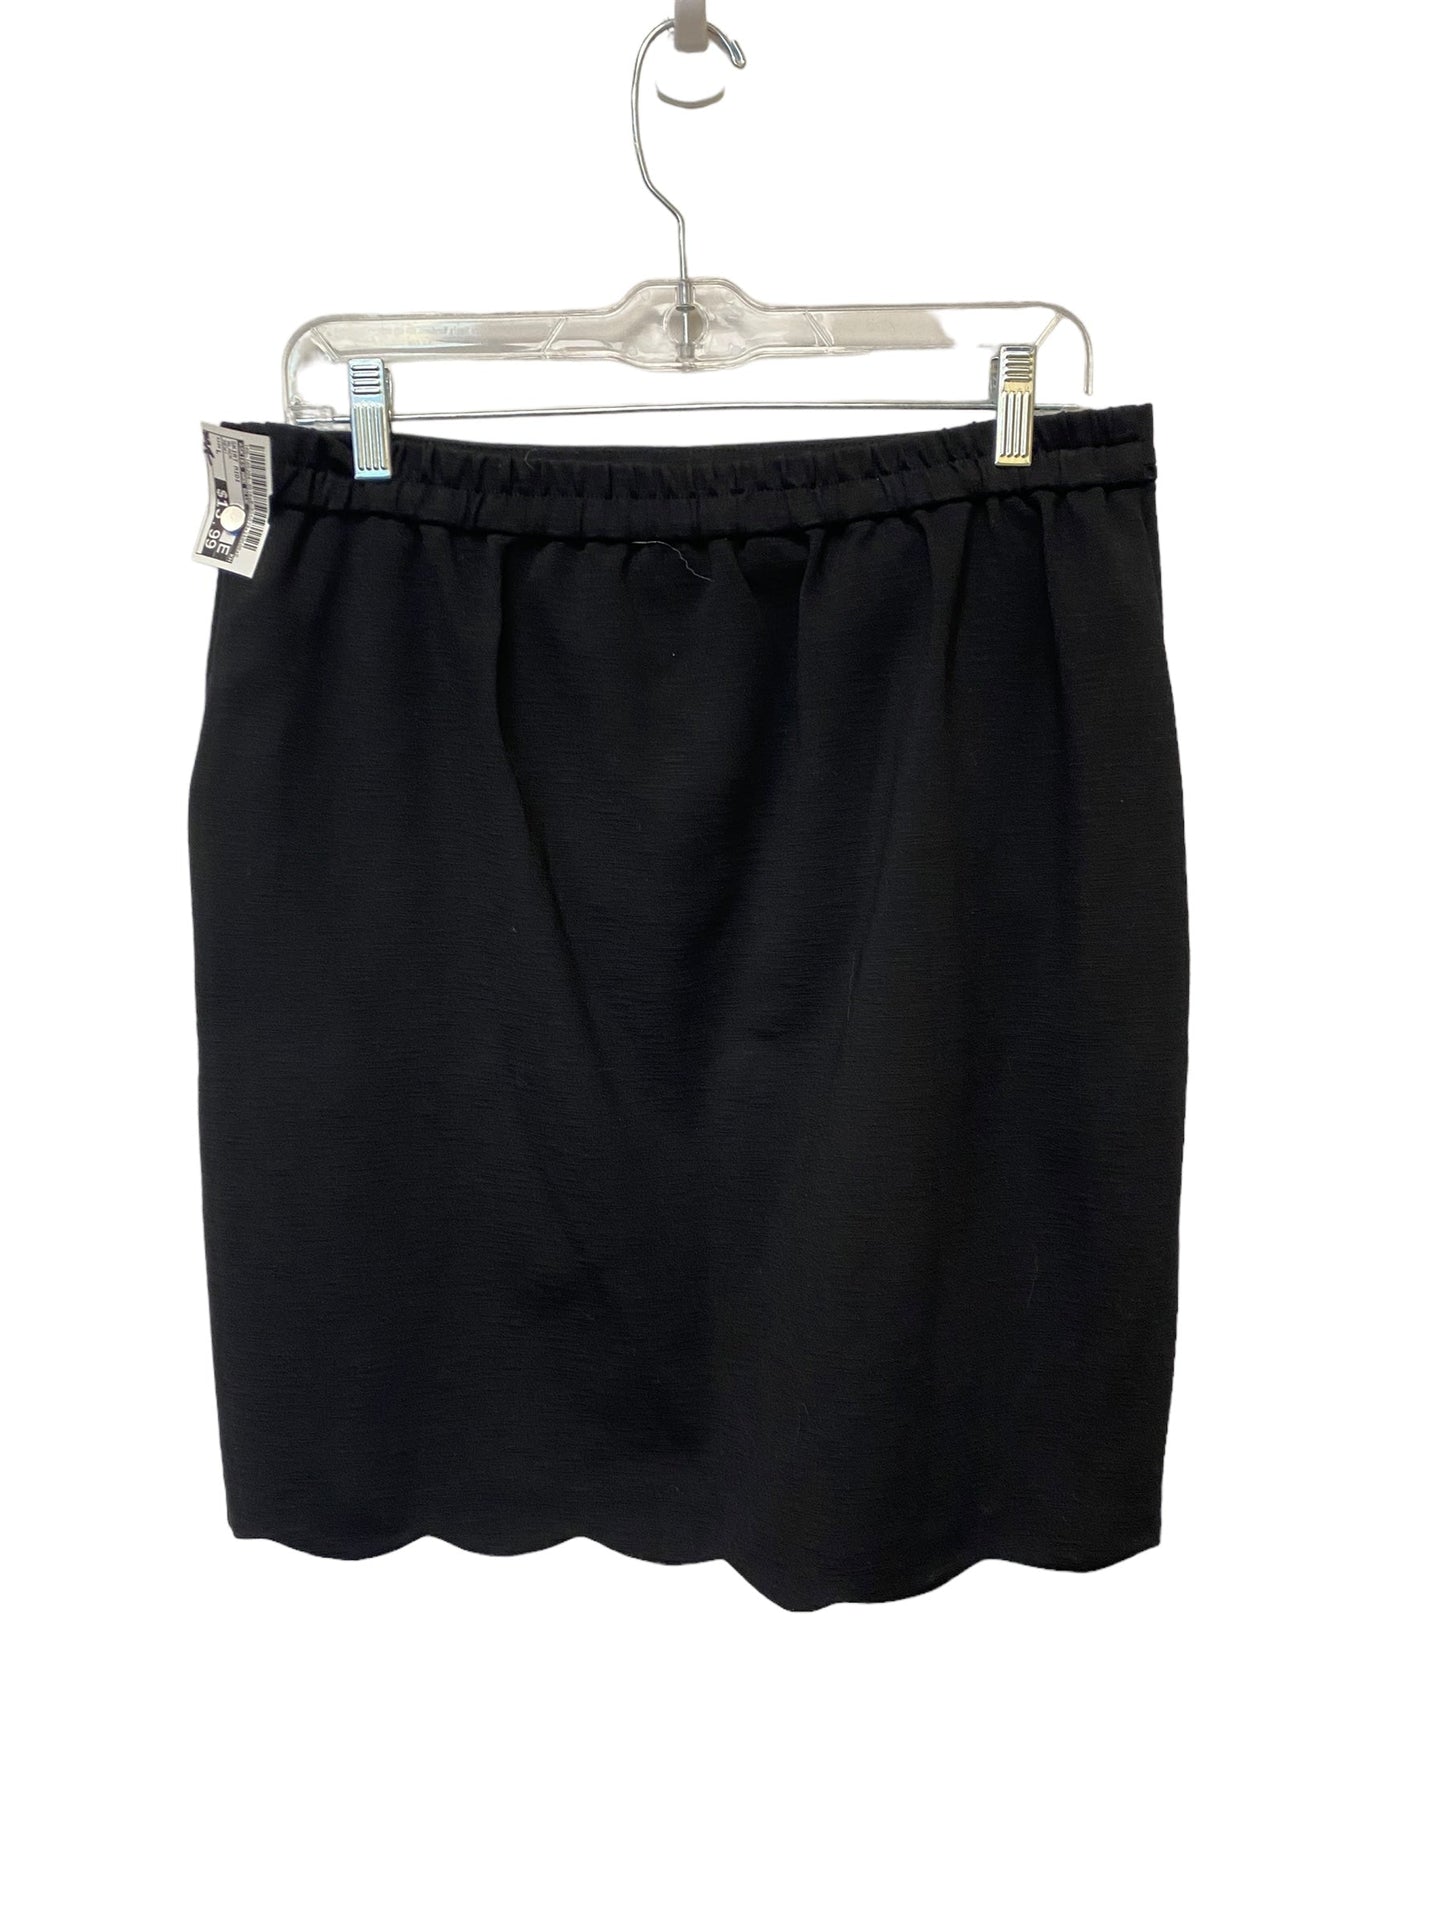 Skort By Duluth Trading  Size: 1x